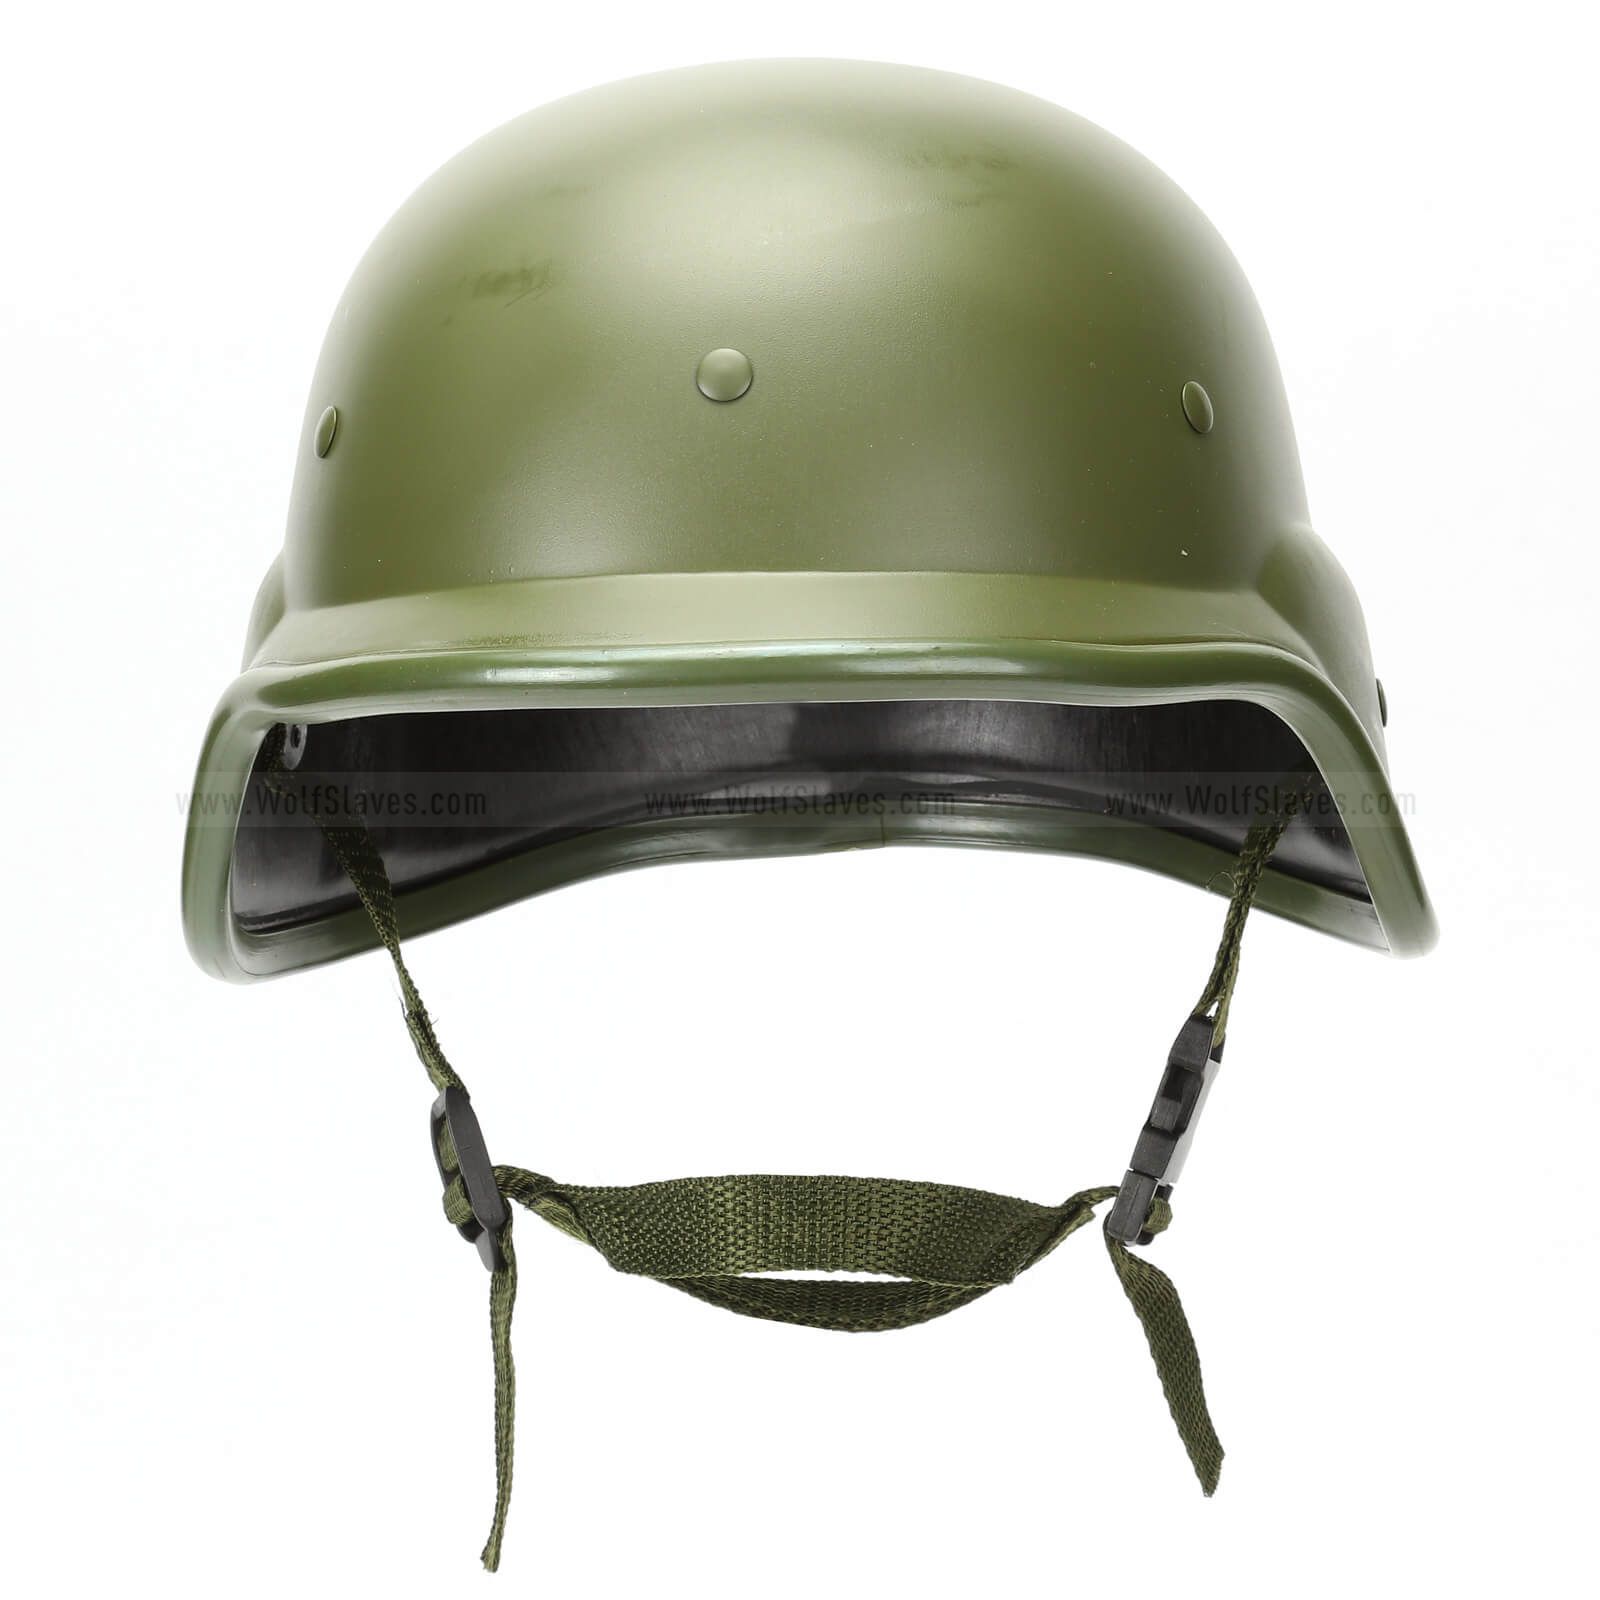 Tactical M88 ABS Helmet with Adjustable Chin Strap 